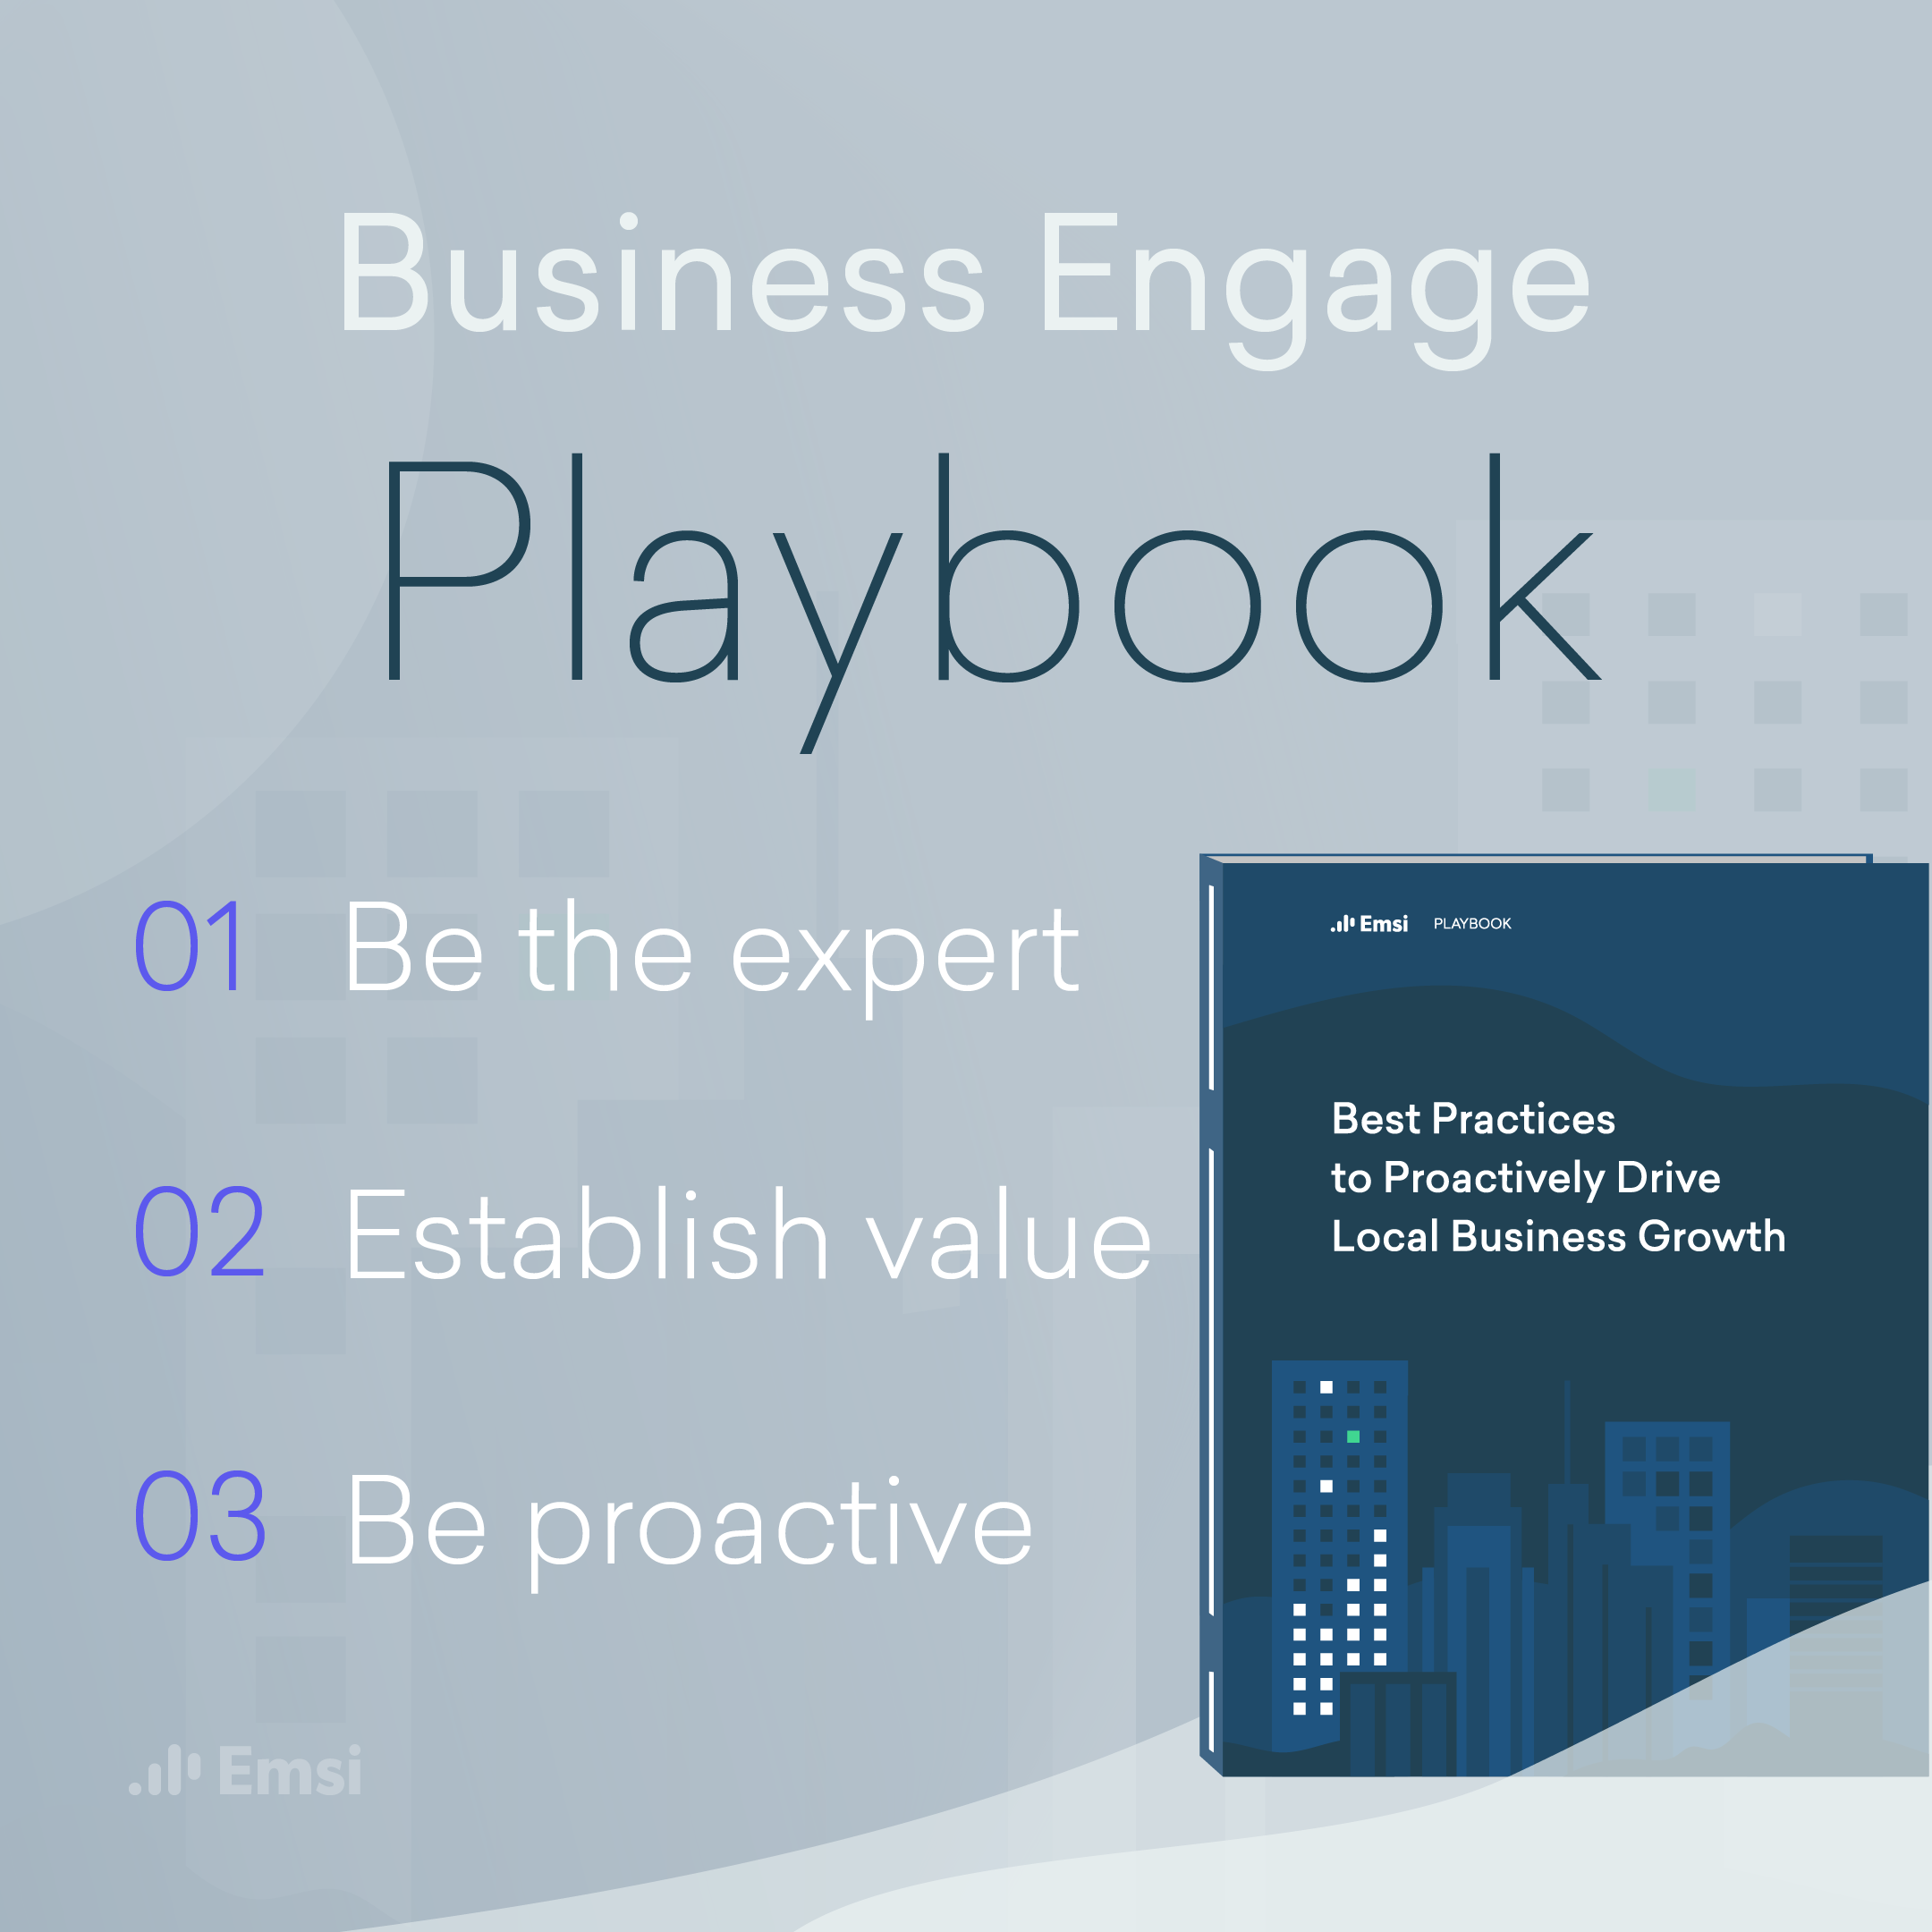 The Business Engage Playbook